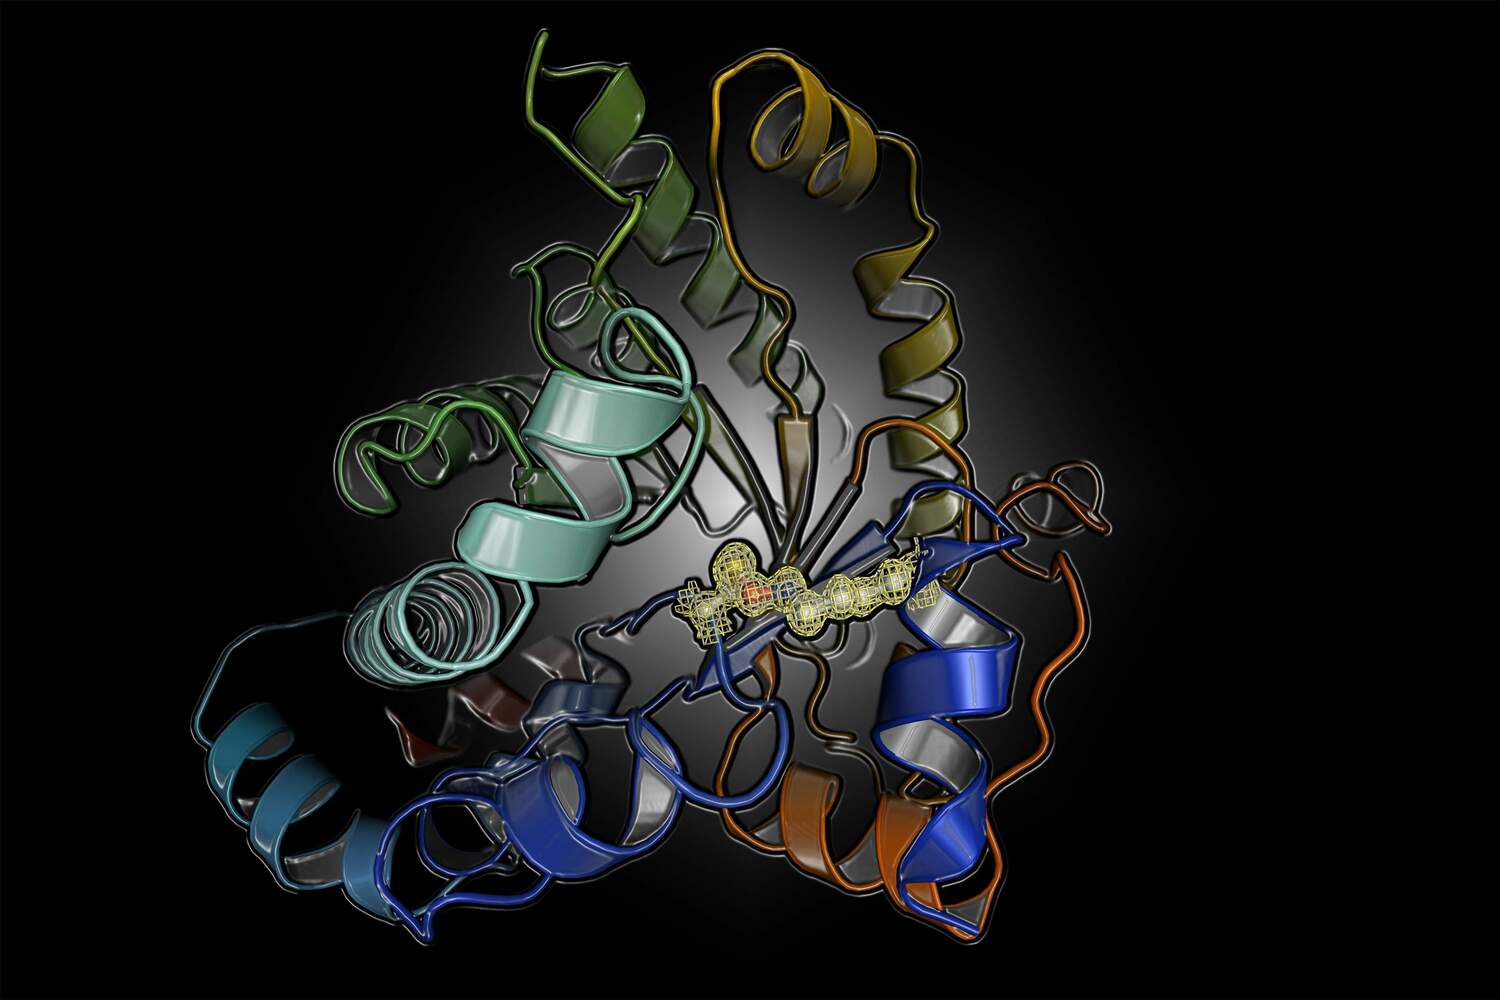 Protein structure with the newly identified switch between a cysteine and lysine residue showing its structure and electron density. This discovery has wide-reaching implications for understanding and treating diseases.